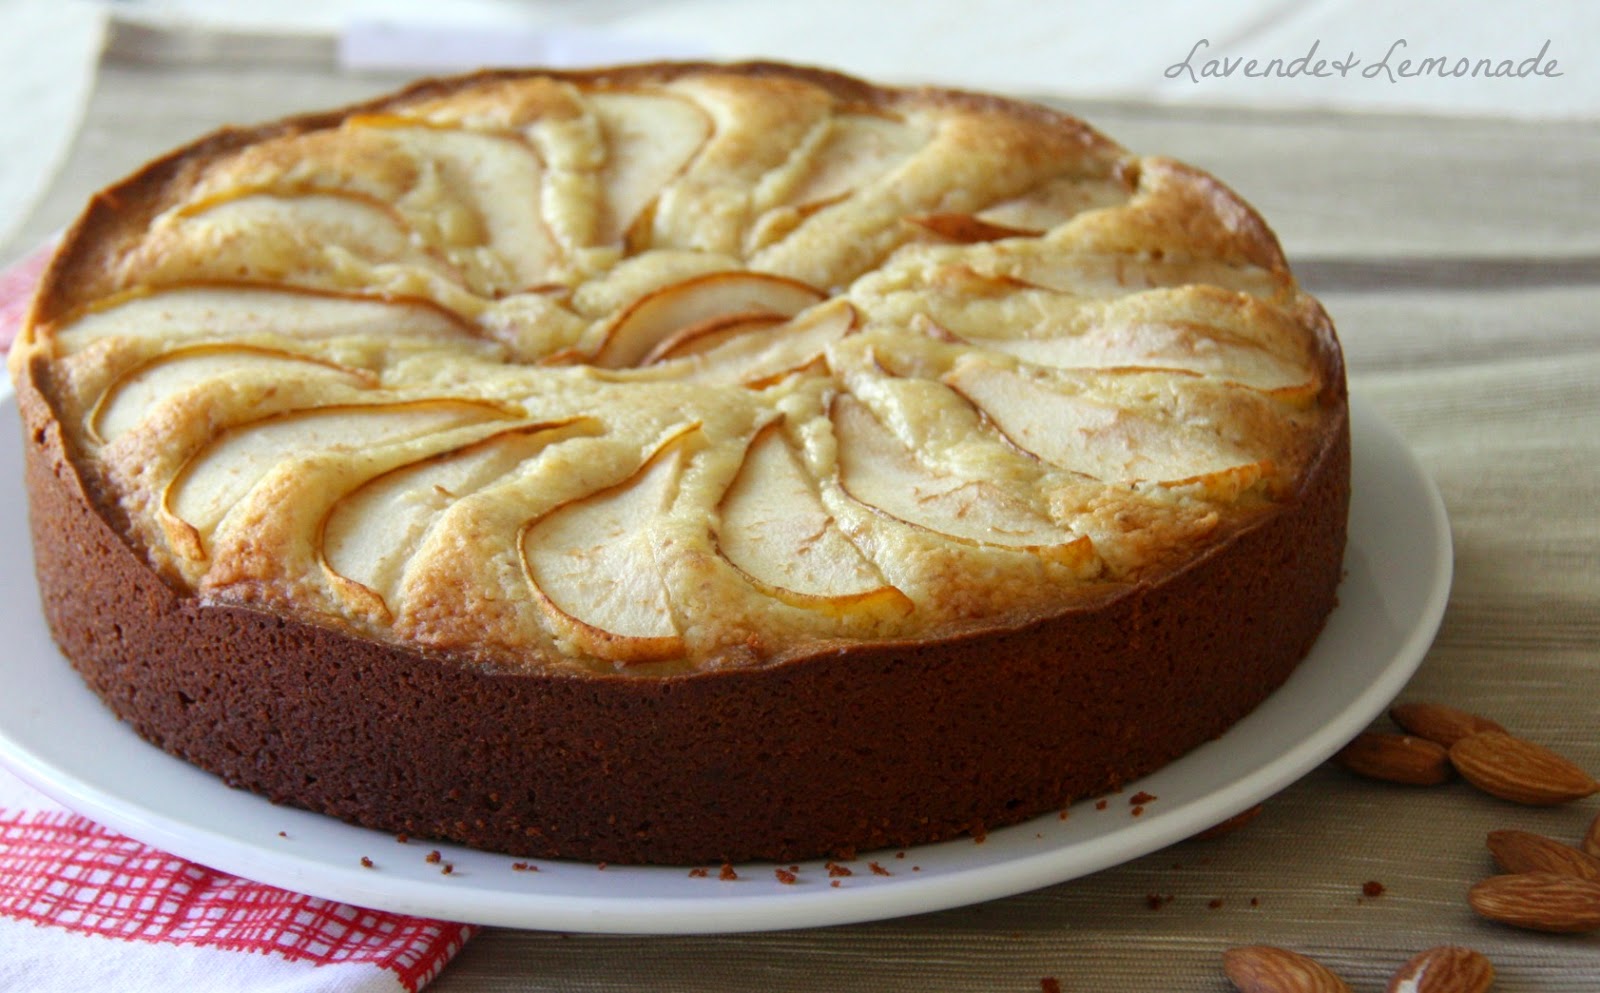 French Almond Yogurt Cake with Pears - Recipe and Tutorial from Lavende & Lemonade